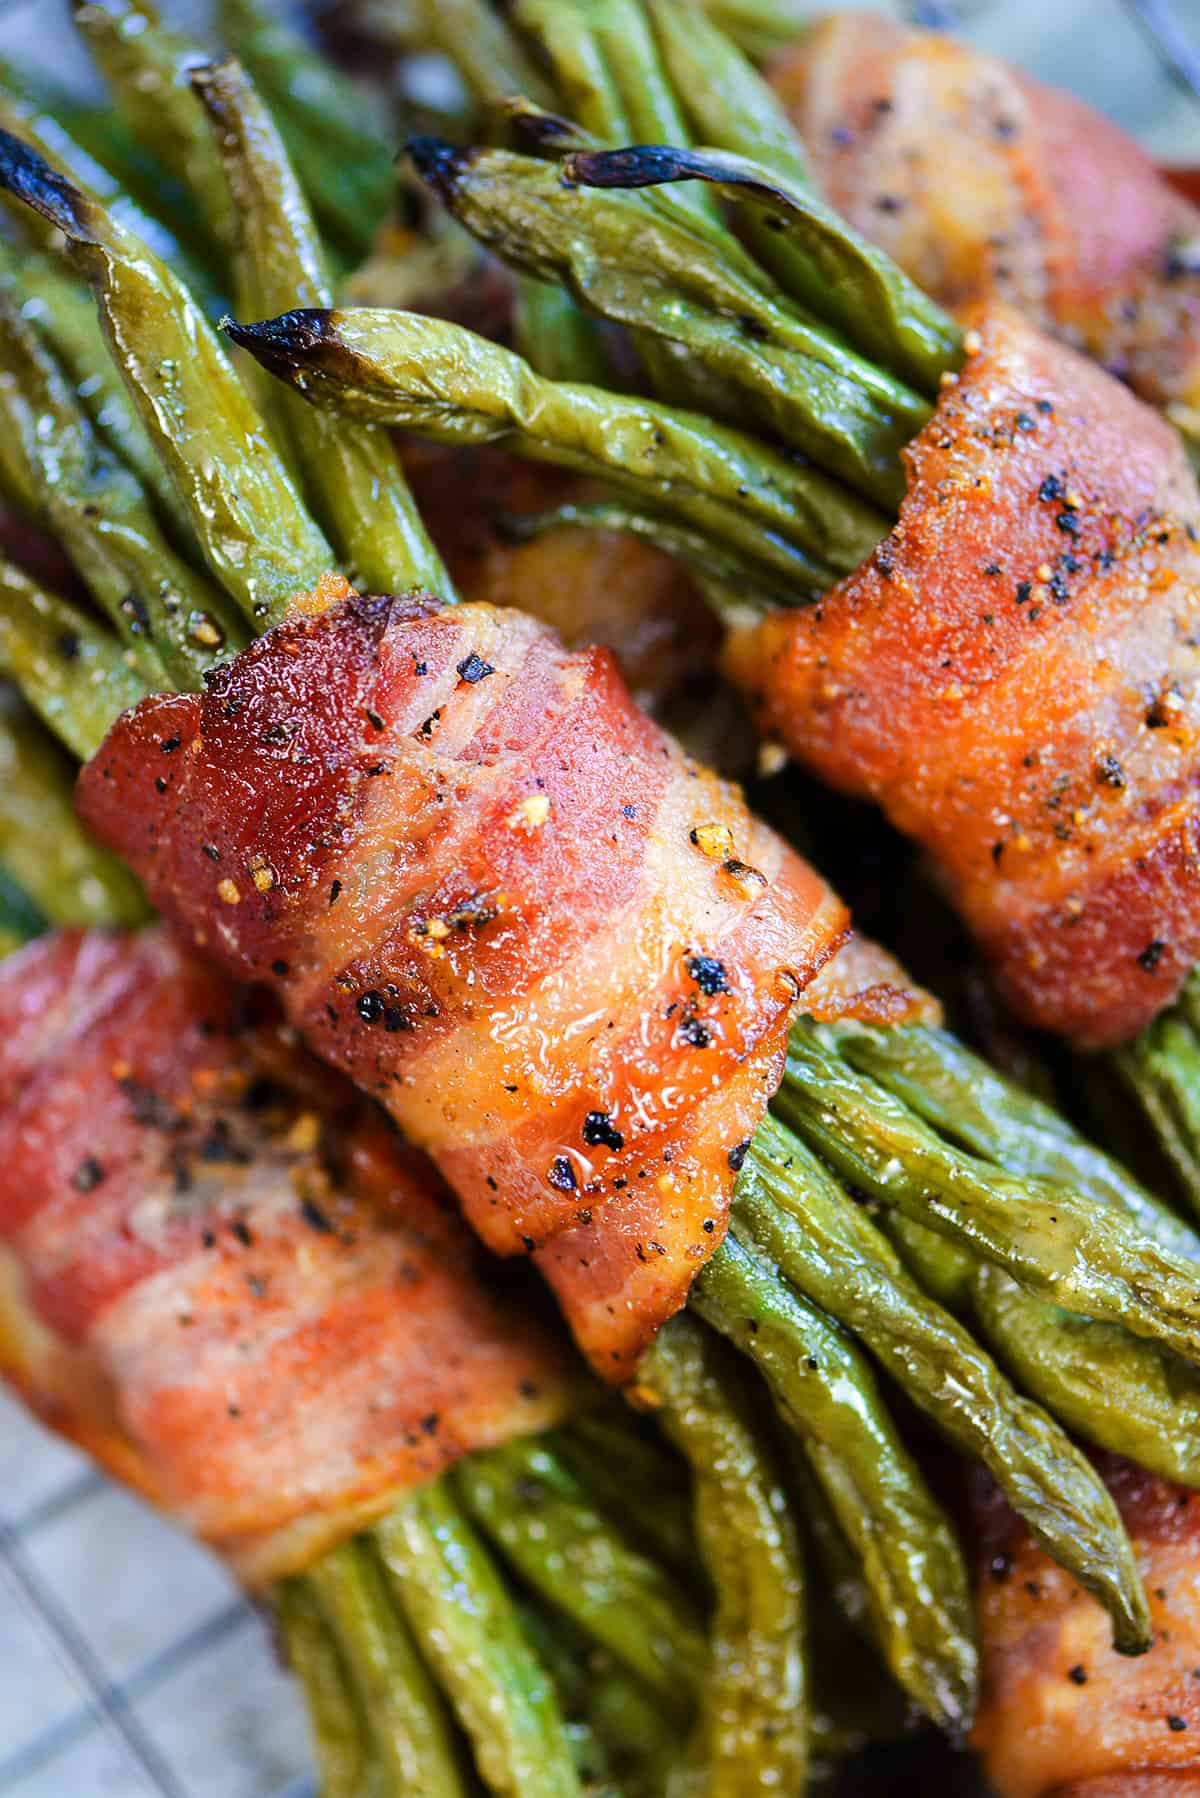 Bacon wrapped green beans on wire rack.